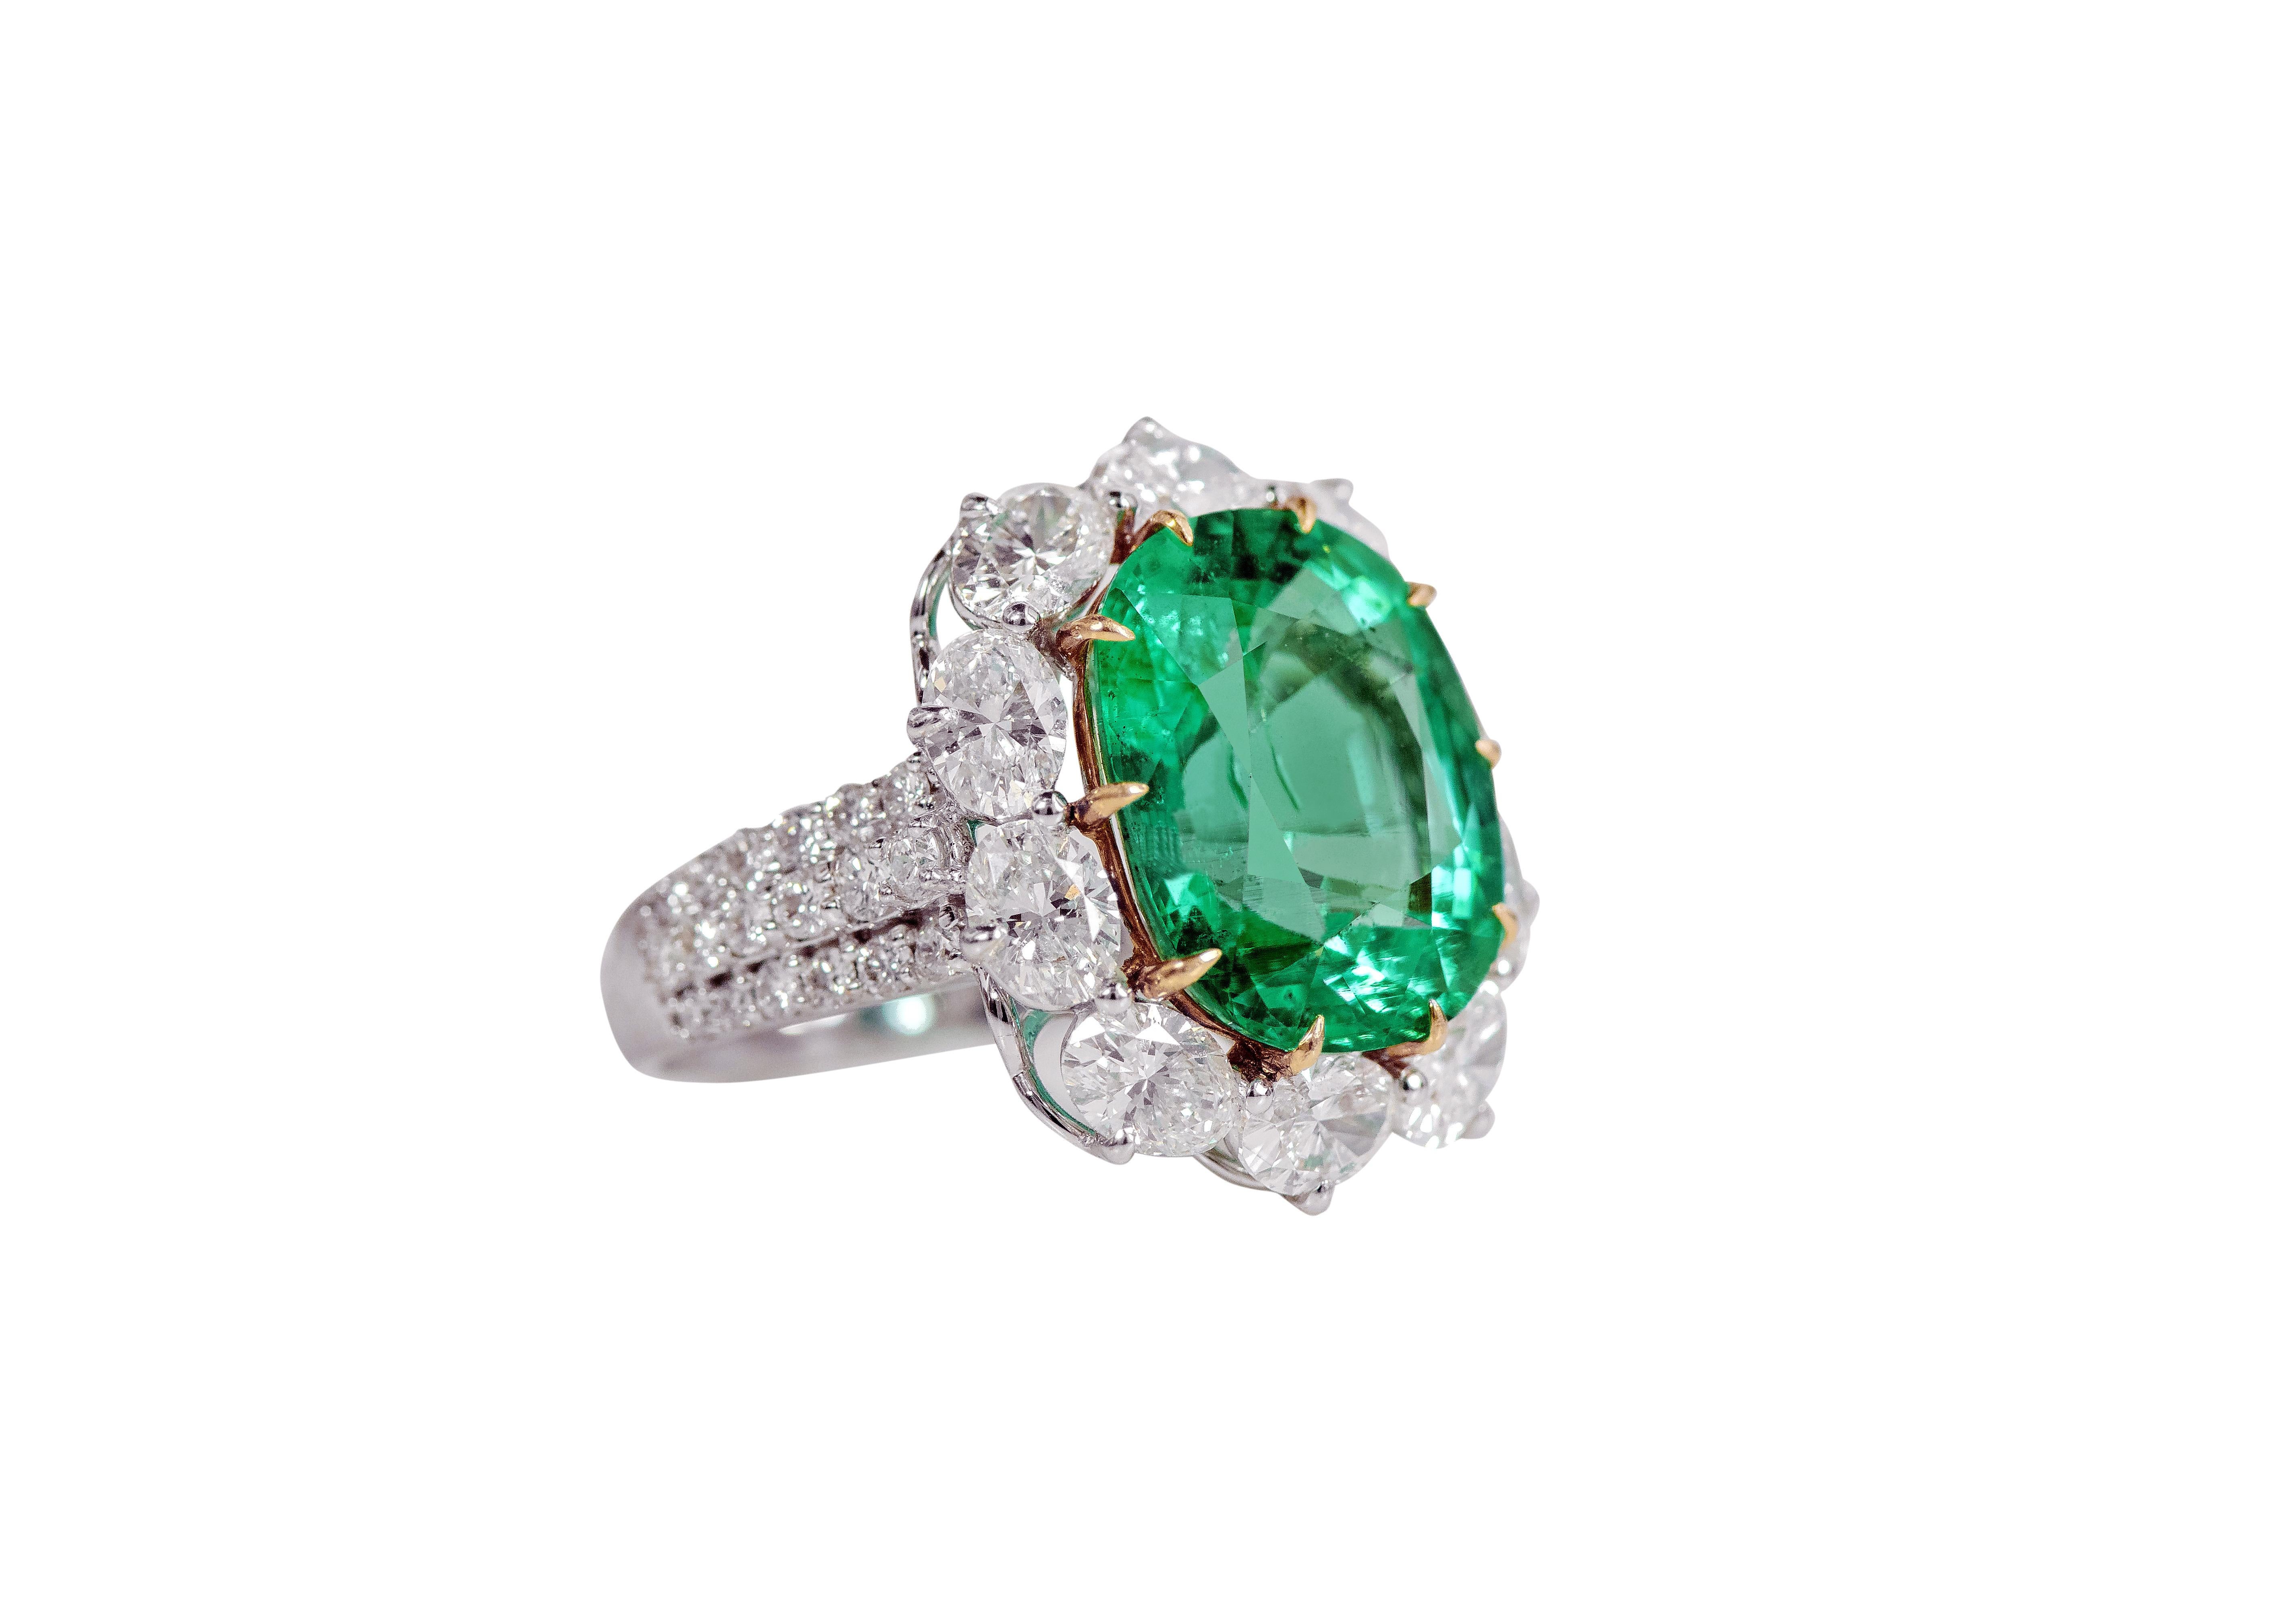  18 Karat Gold 8.08 Carat Natural Emerald with Diamond Cluster Cocktail Ring 

This classic cluster ring design is elevated with the use of solitaire oval cut diamonds surrounding the exemplary celadon cushions-oval solitaire emerald. It speaks